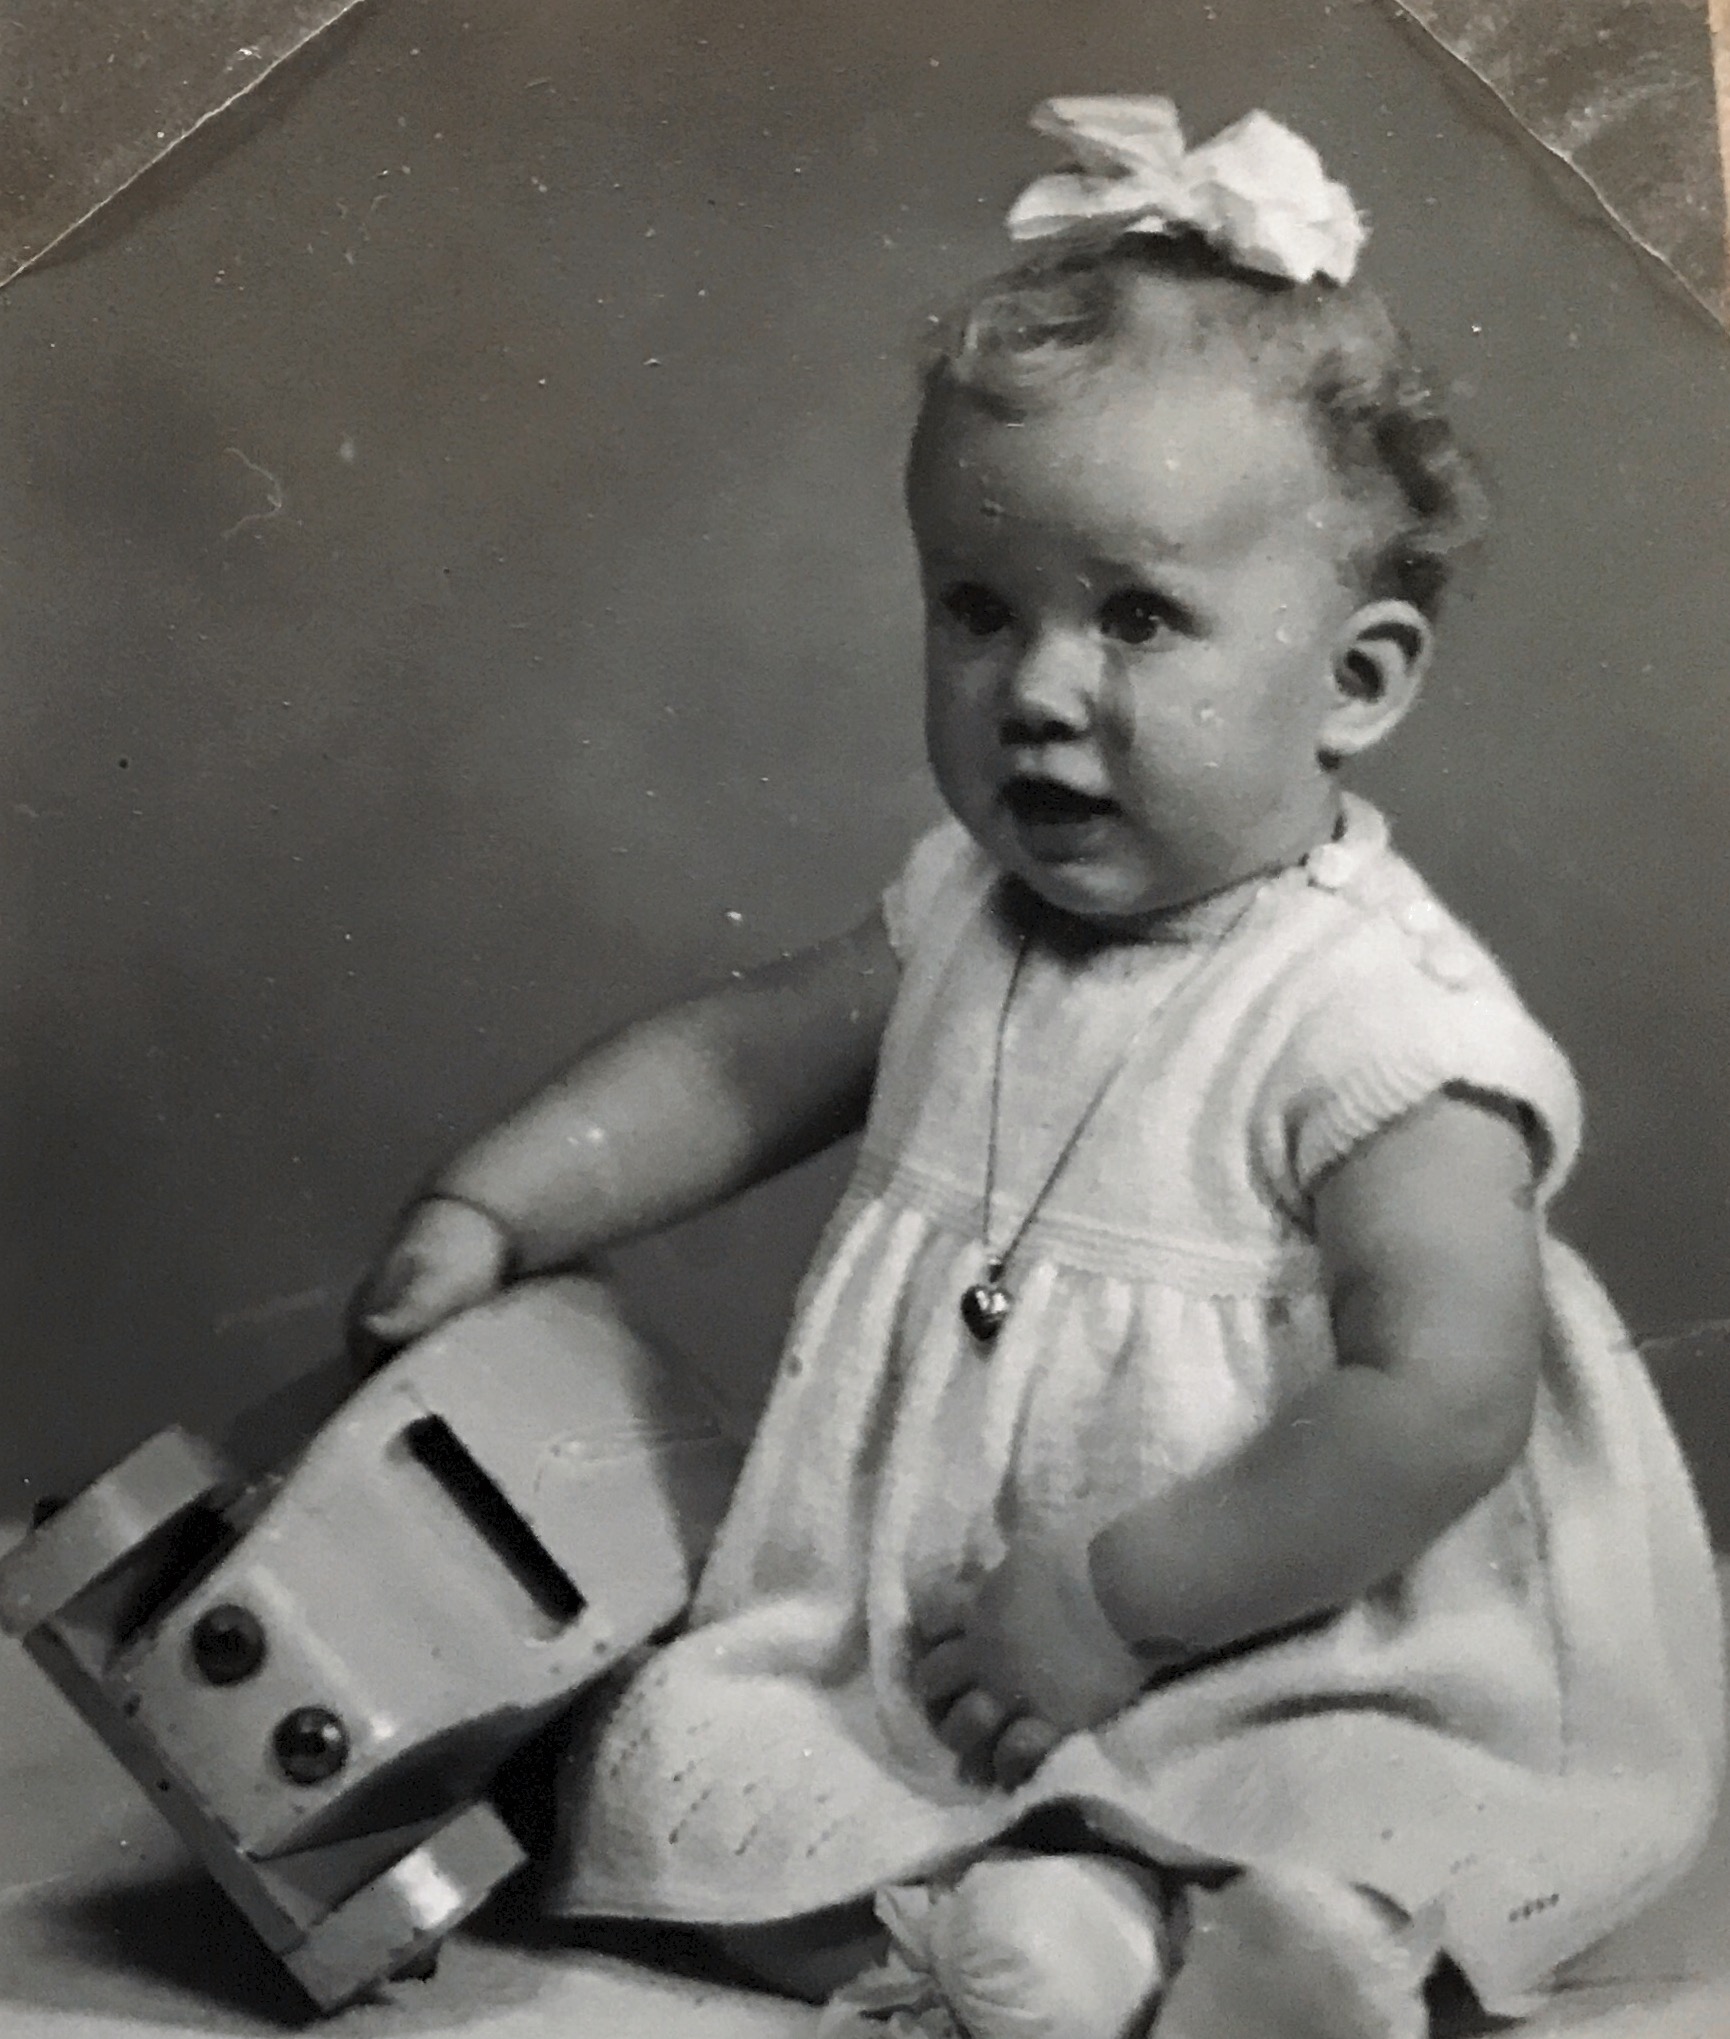 It’s a photo of me, in 1954 when my mother took me to a professional photography studio